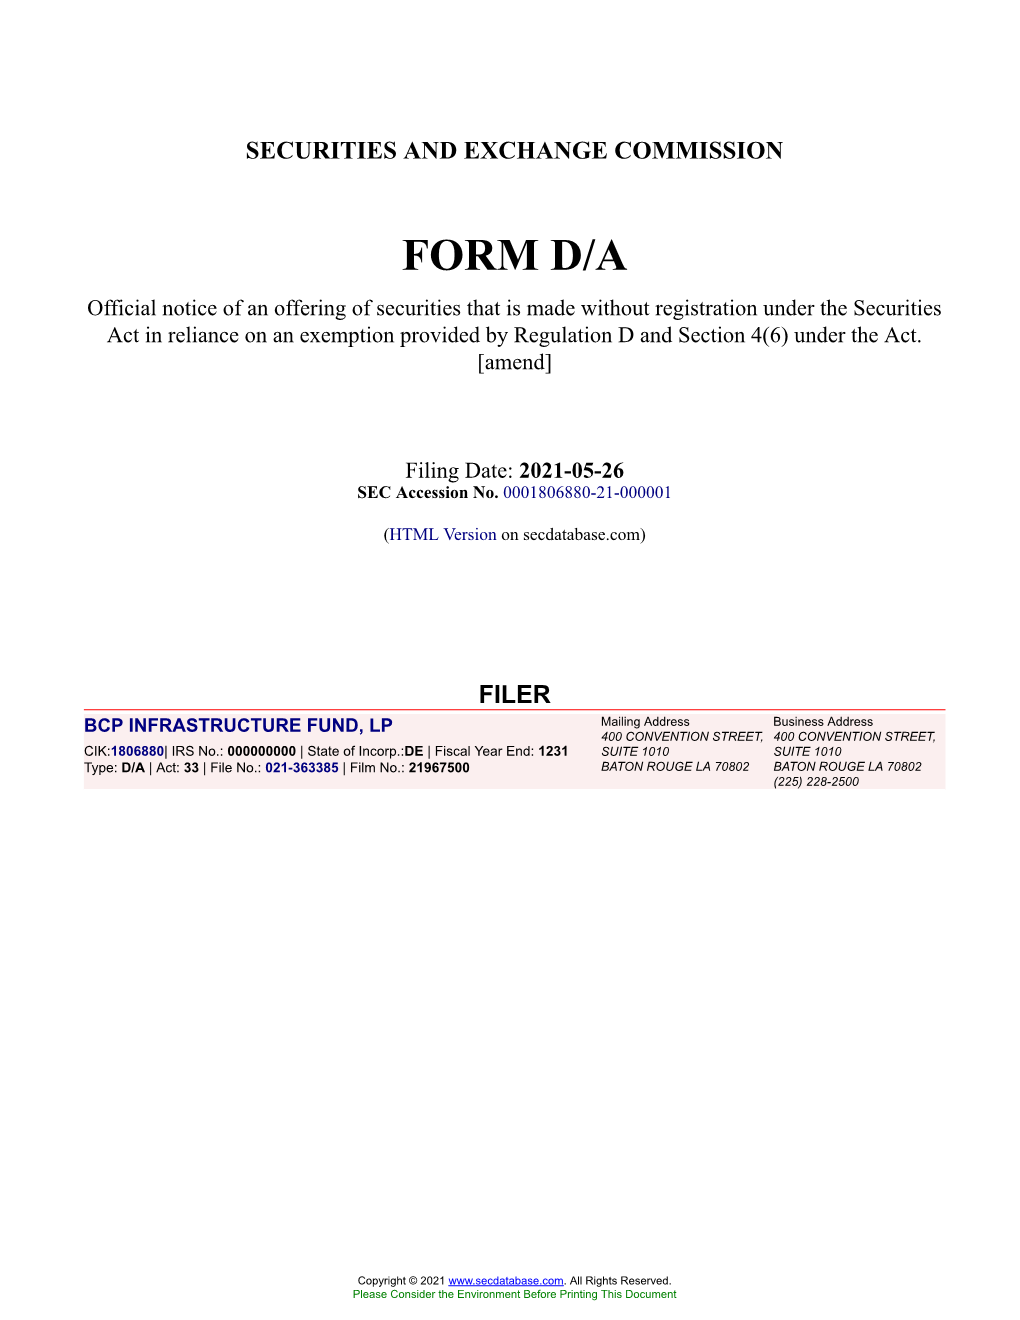 BCP INFRASTRUCTURE FUND, LP Form D/A Filed 2021-05-26